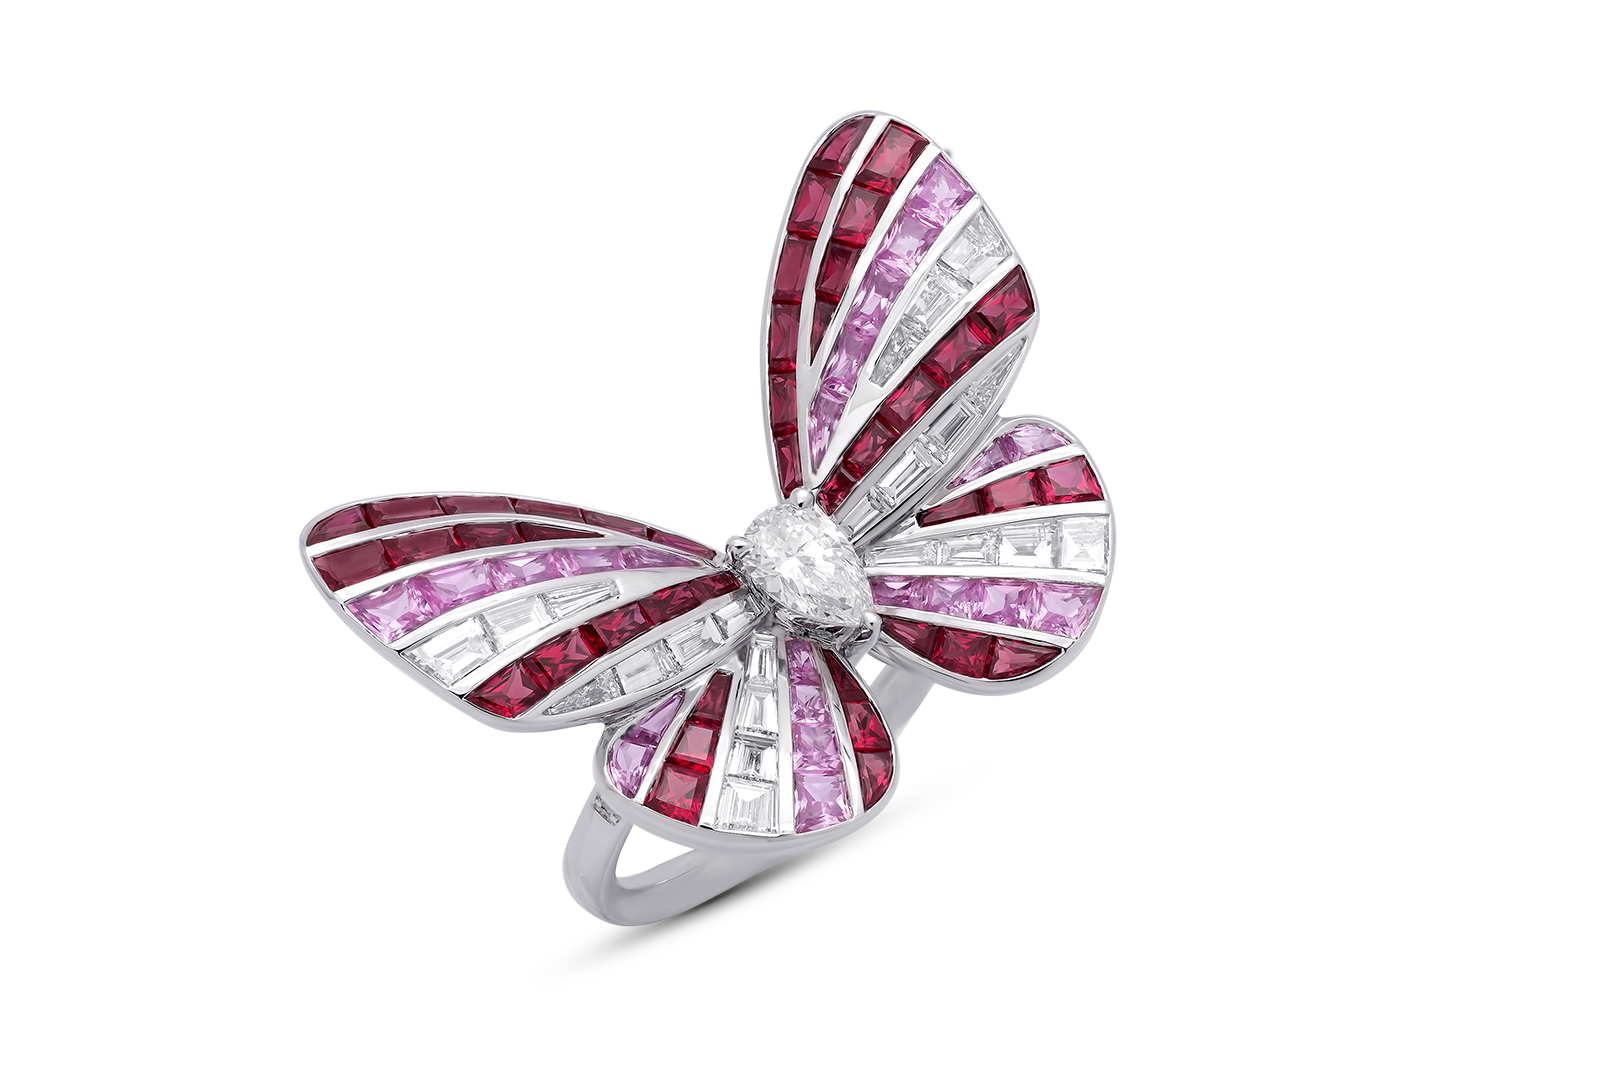 Butterfly Lovers: Stenzhorn's latest collection unveiled at 